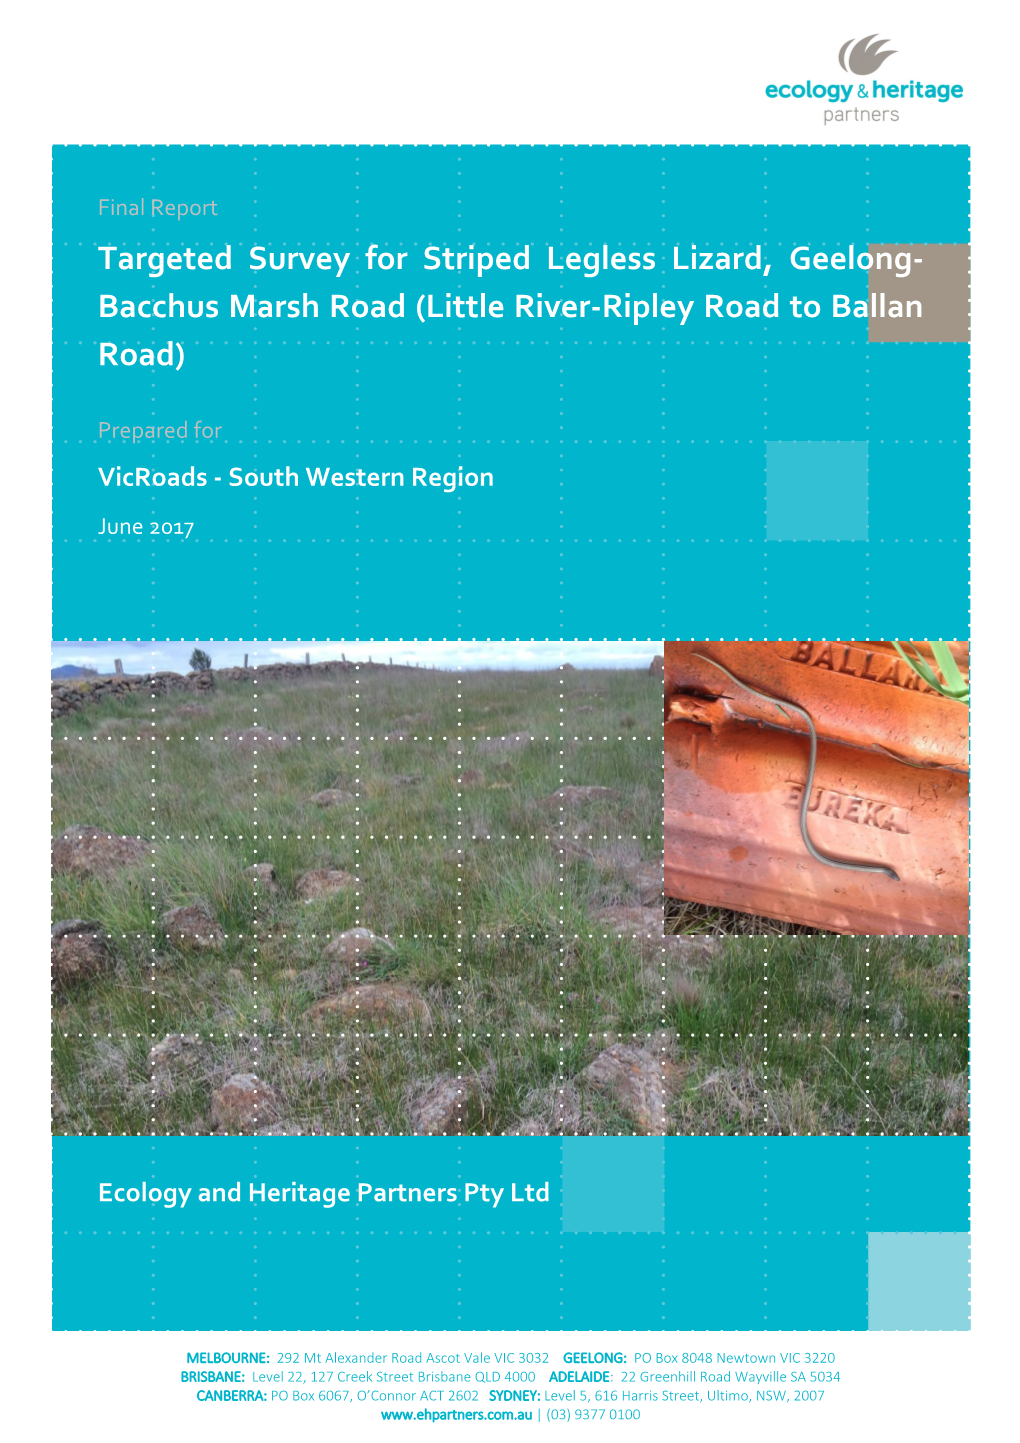 Targeted Survey for Striped Legless Lizard, Geelong- Bacchus Marsh Road (Little River-Ripley Road to Ballan Road)